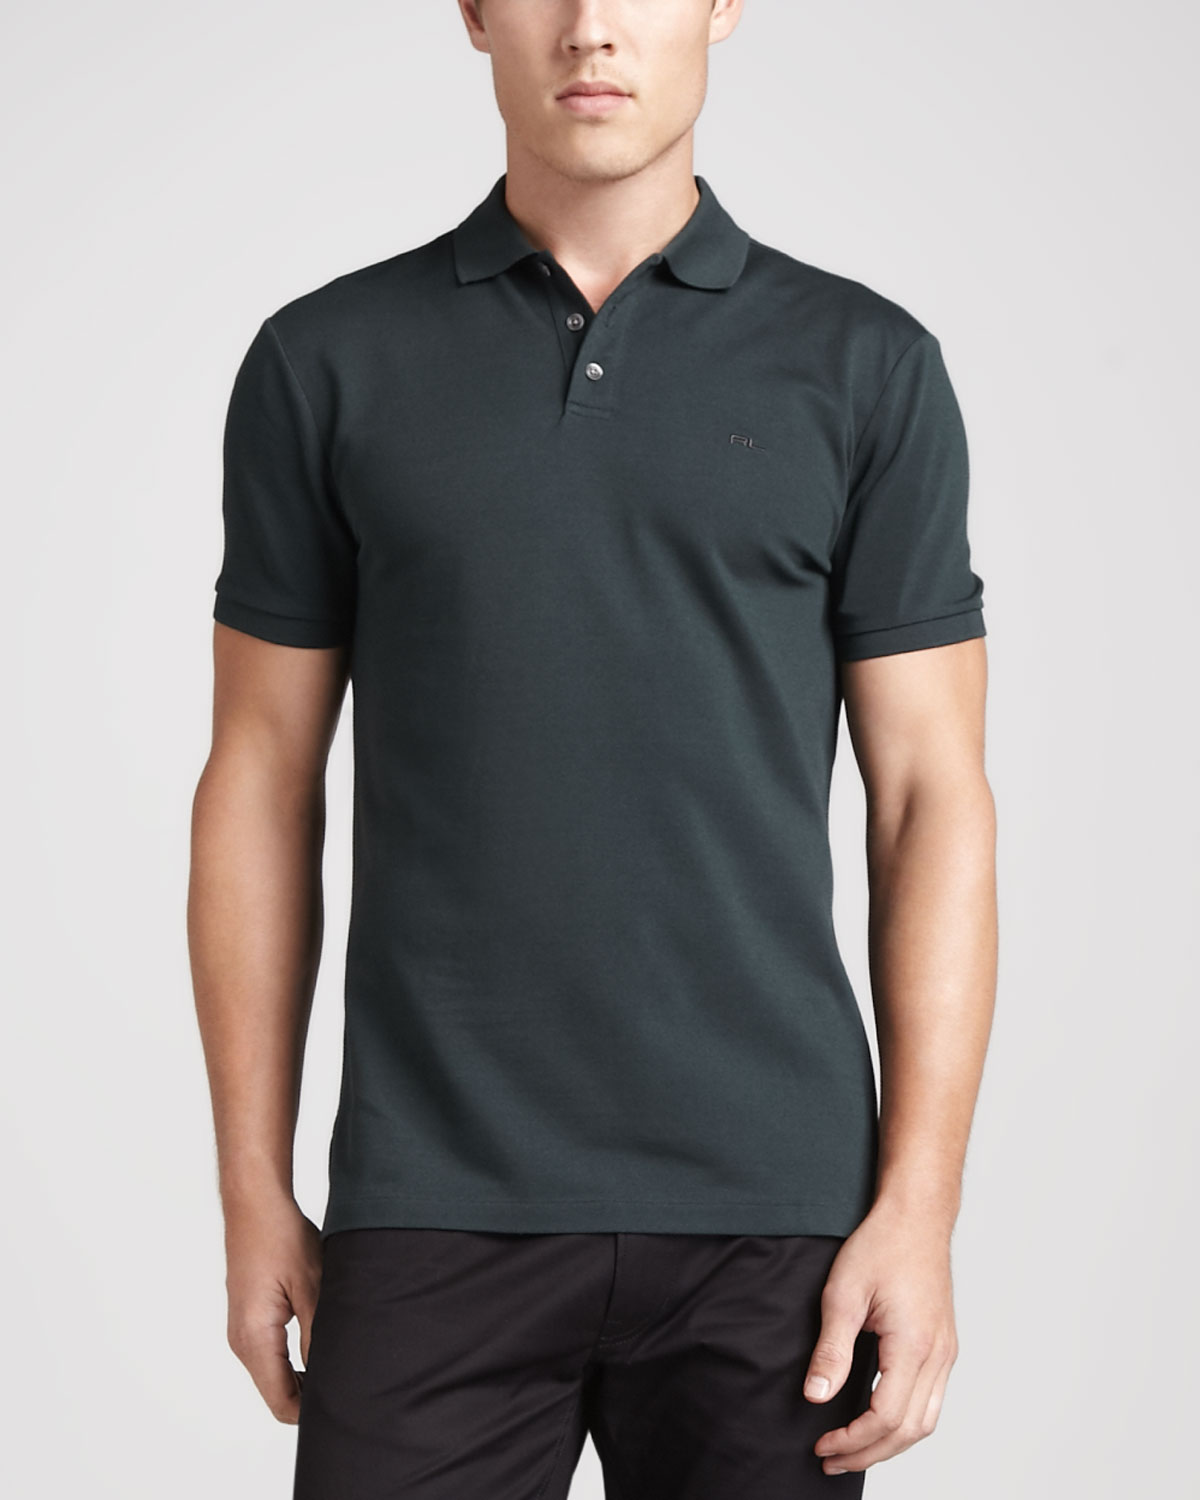 Lyst - Ralph Lauren Black Label Stretch-knit Polo Shirt Forest Green in ...